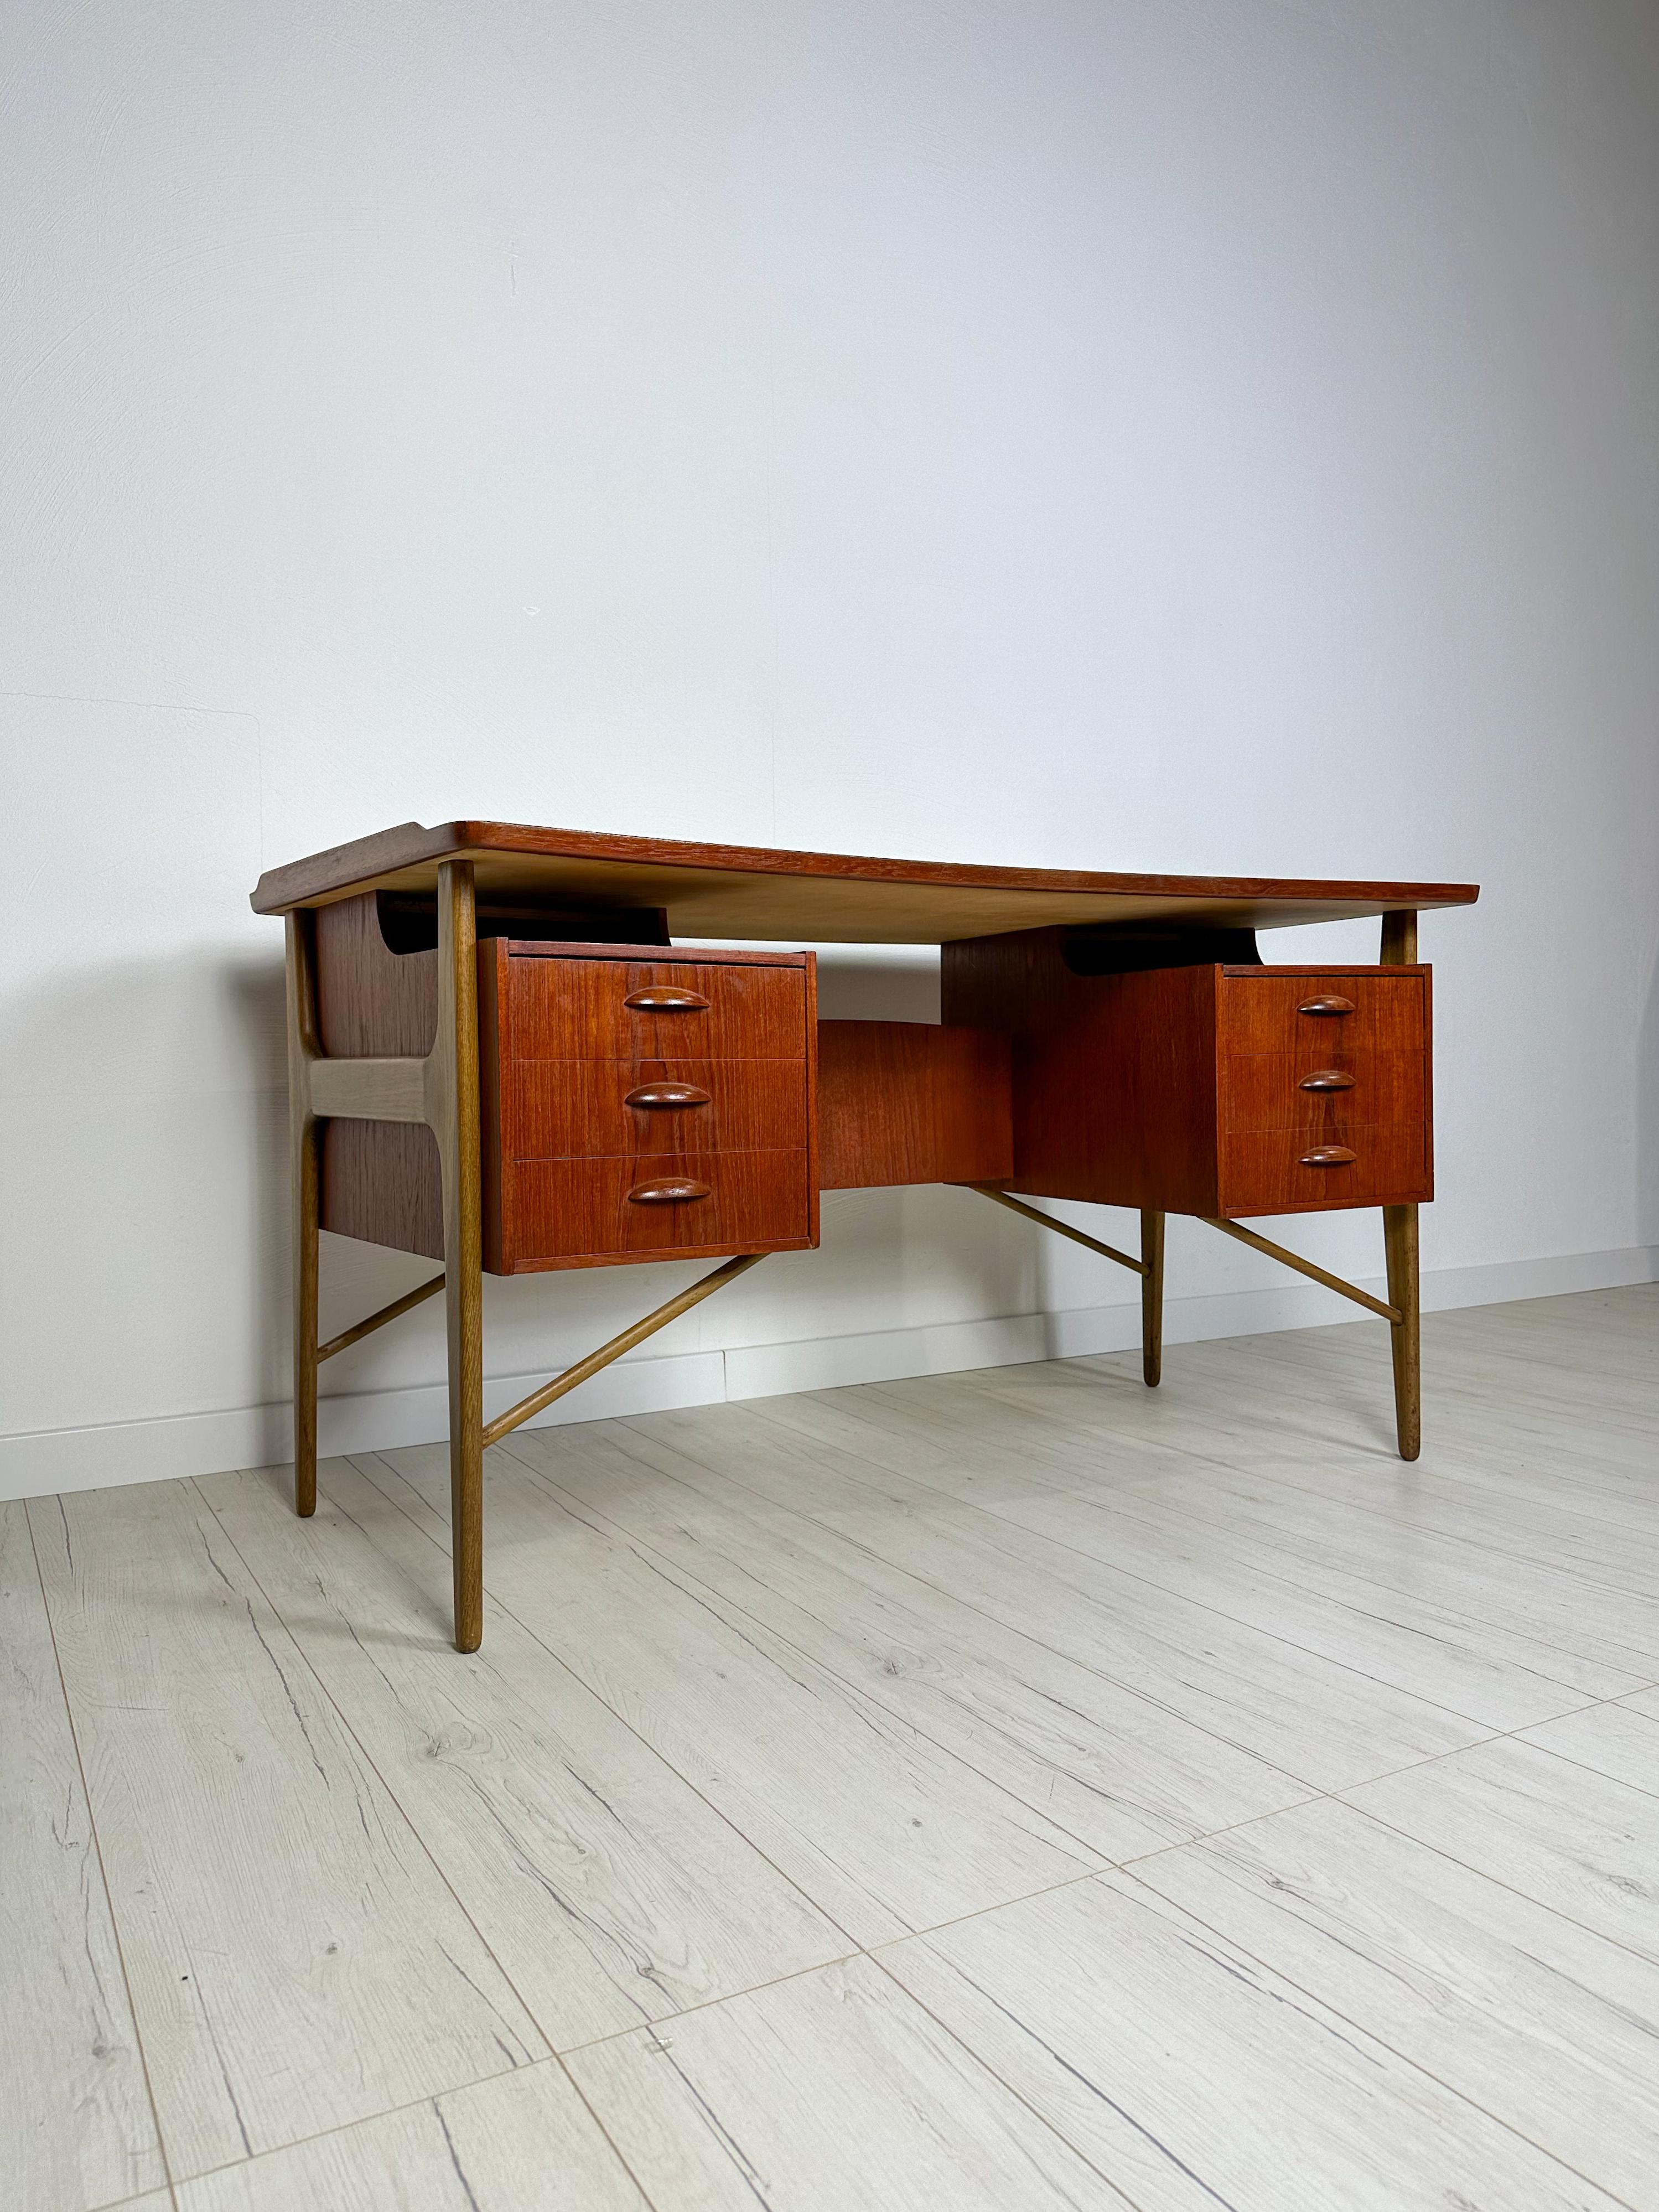 Beautiful vintage bow-fronted writing desk original from the 1960s featuring six drawers with backside shelving for additional storage space and a minibar. Walnut legs combined with high-quality teak wood. Designed by Svend Aage Madsen. Denmark.